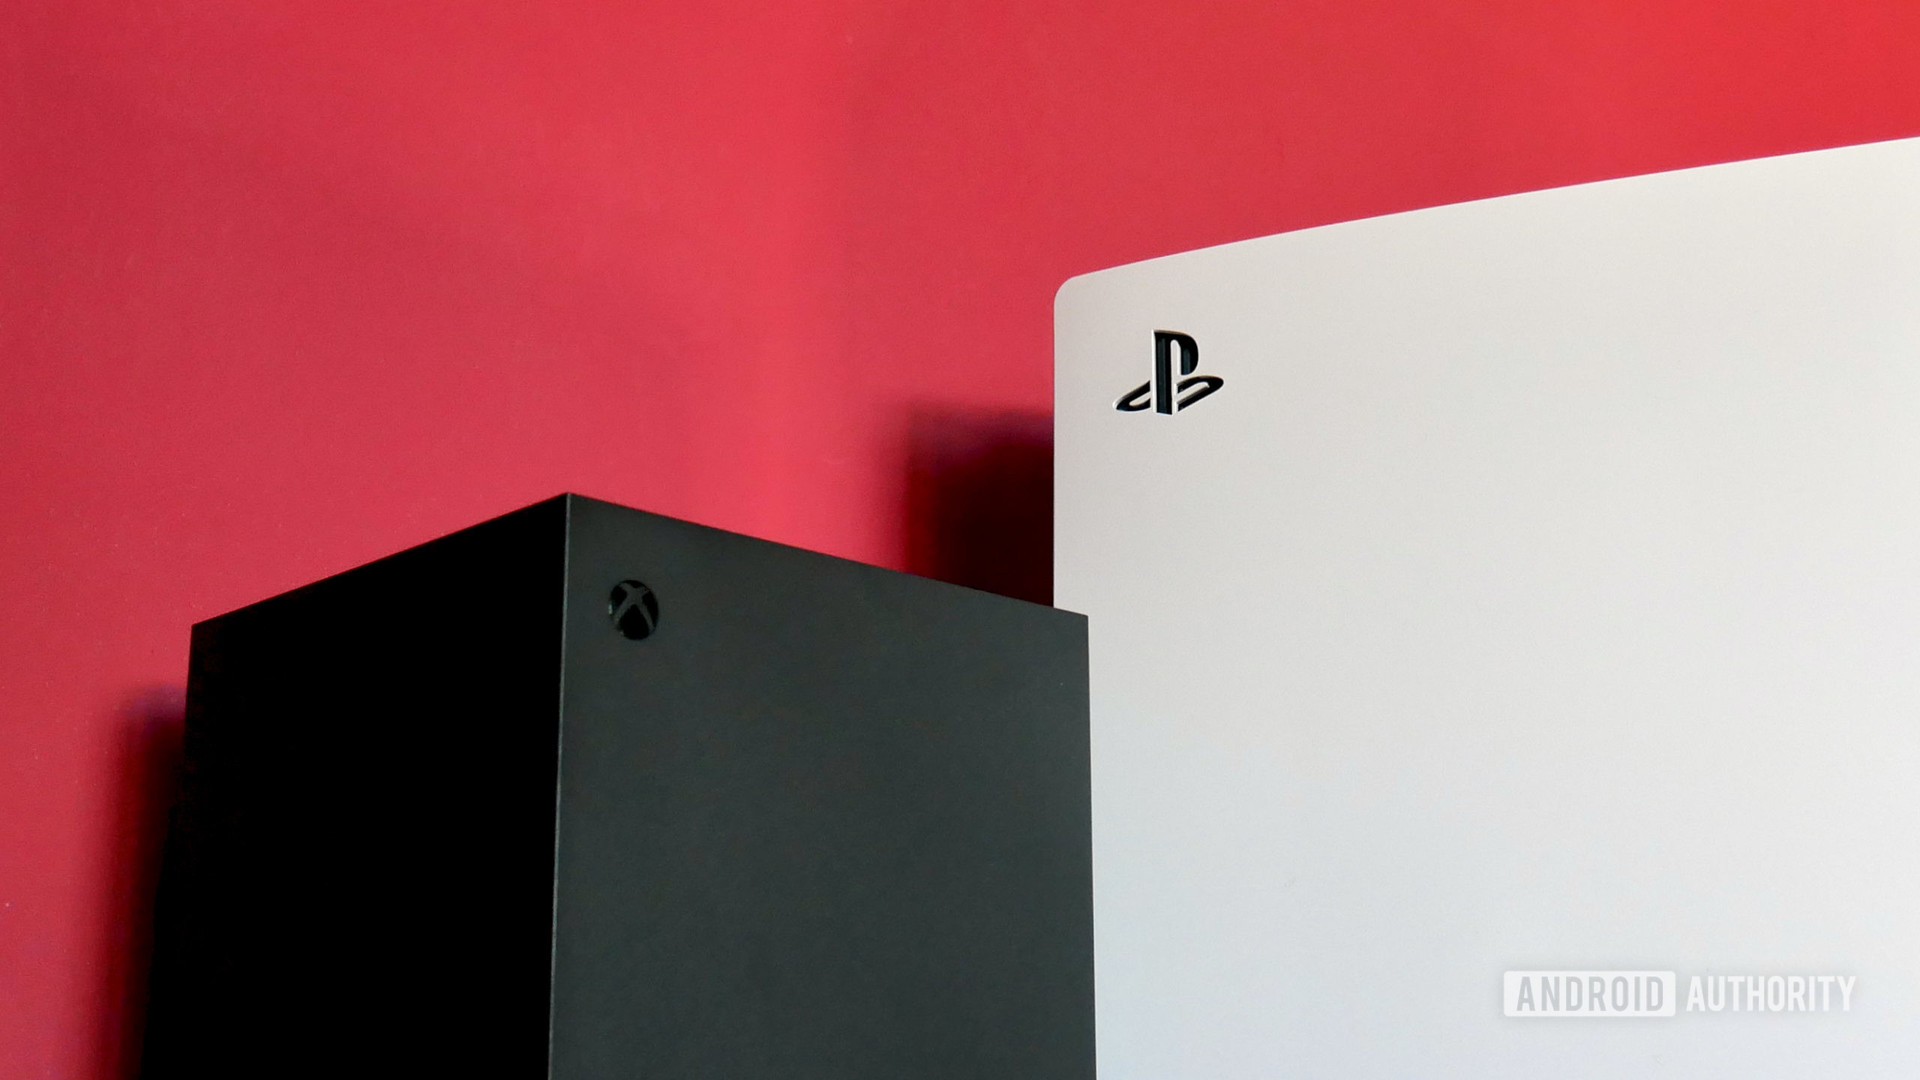 Is a digital-only PS5 a good or bad idea? We debate Sony's decision